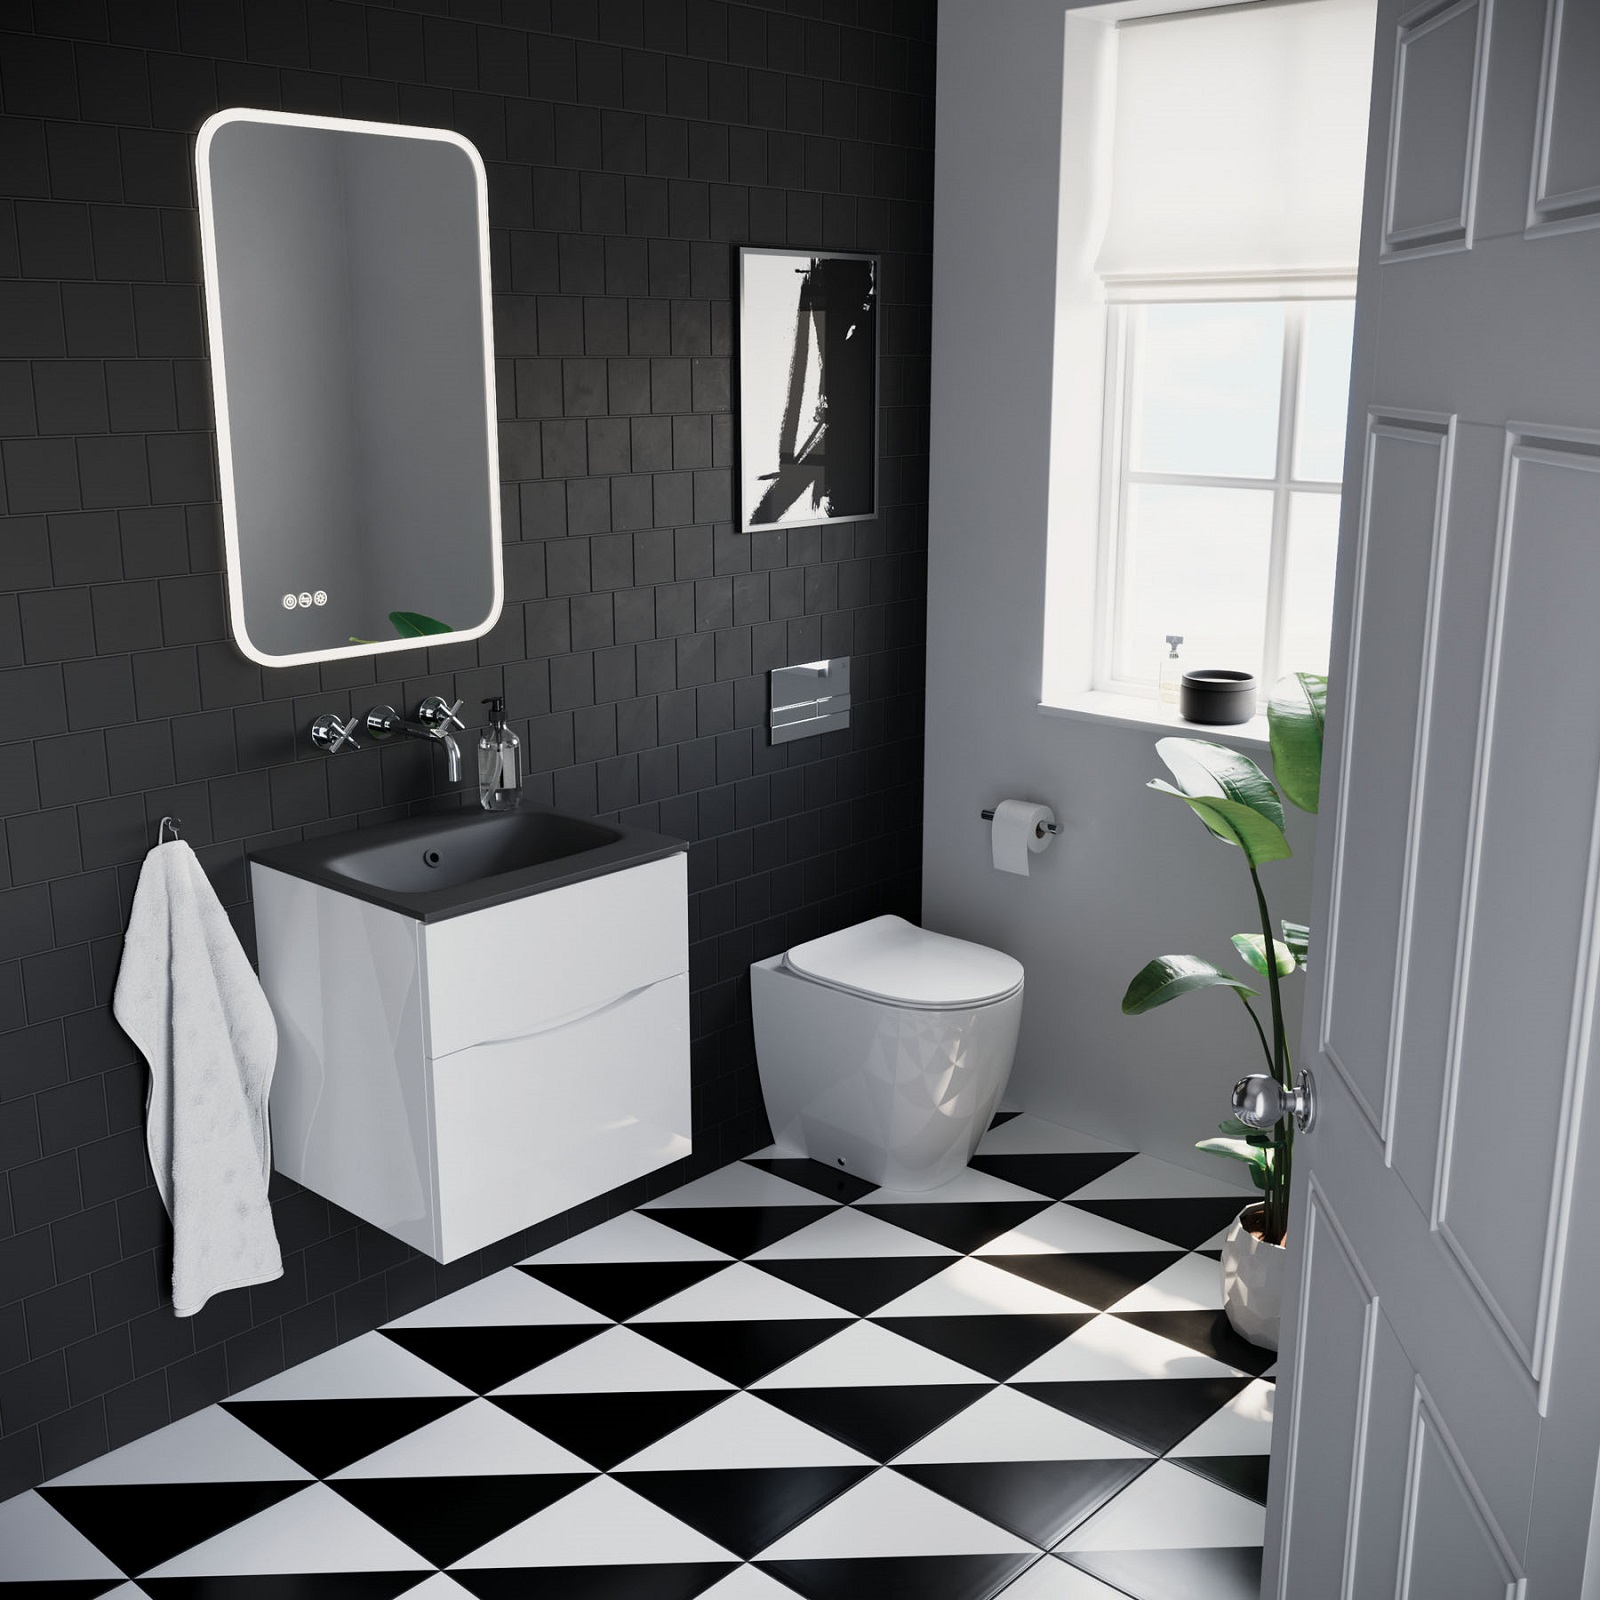 Lifestyle image of a black bathroom desing, featuring black wall tiles, black and white floor tiles and a black washbasin